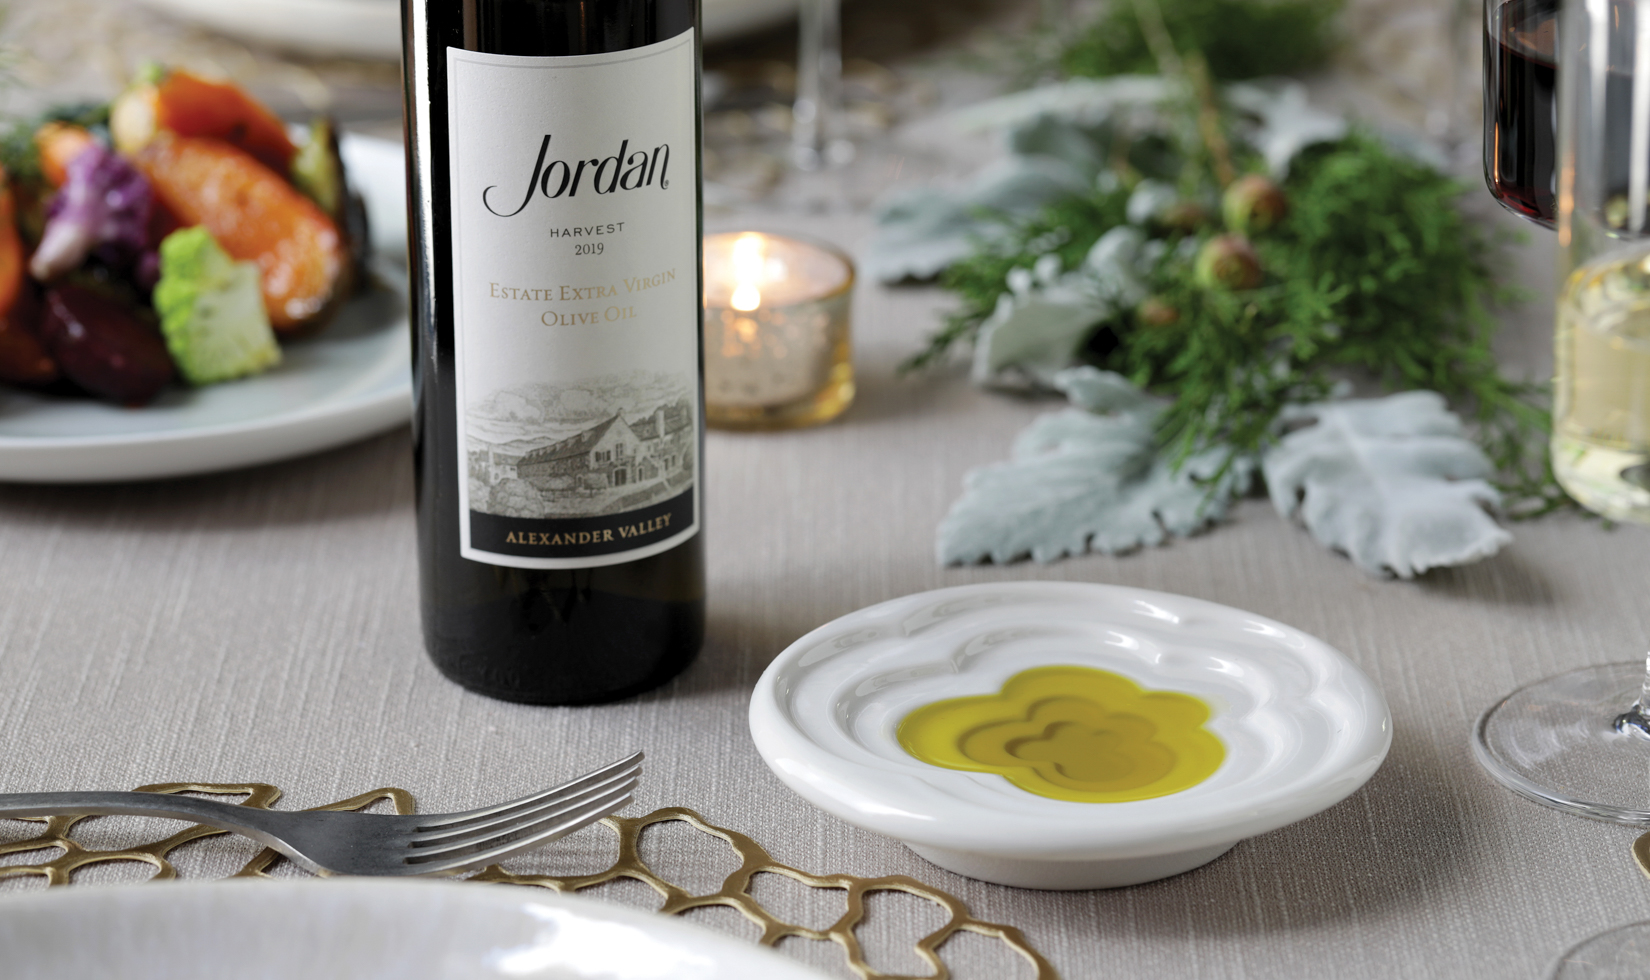 jordan winery olive oil dipping dish on holiday dinner table